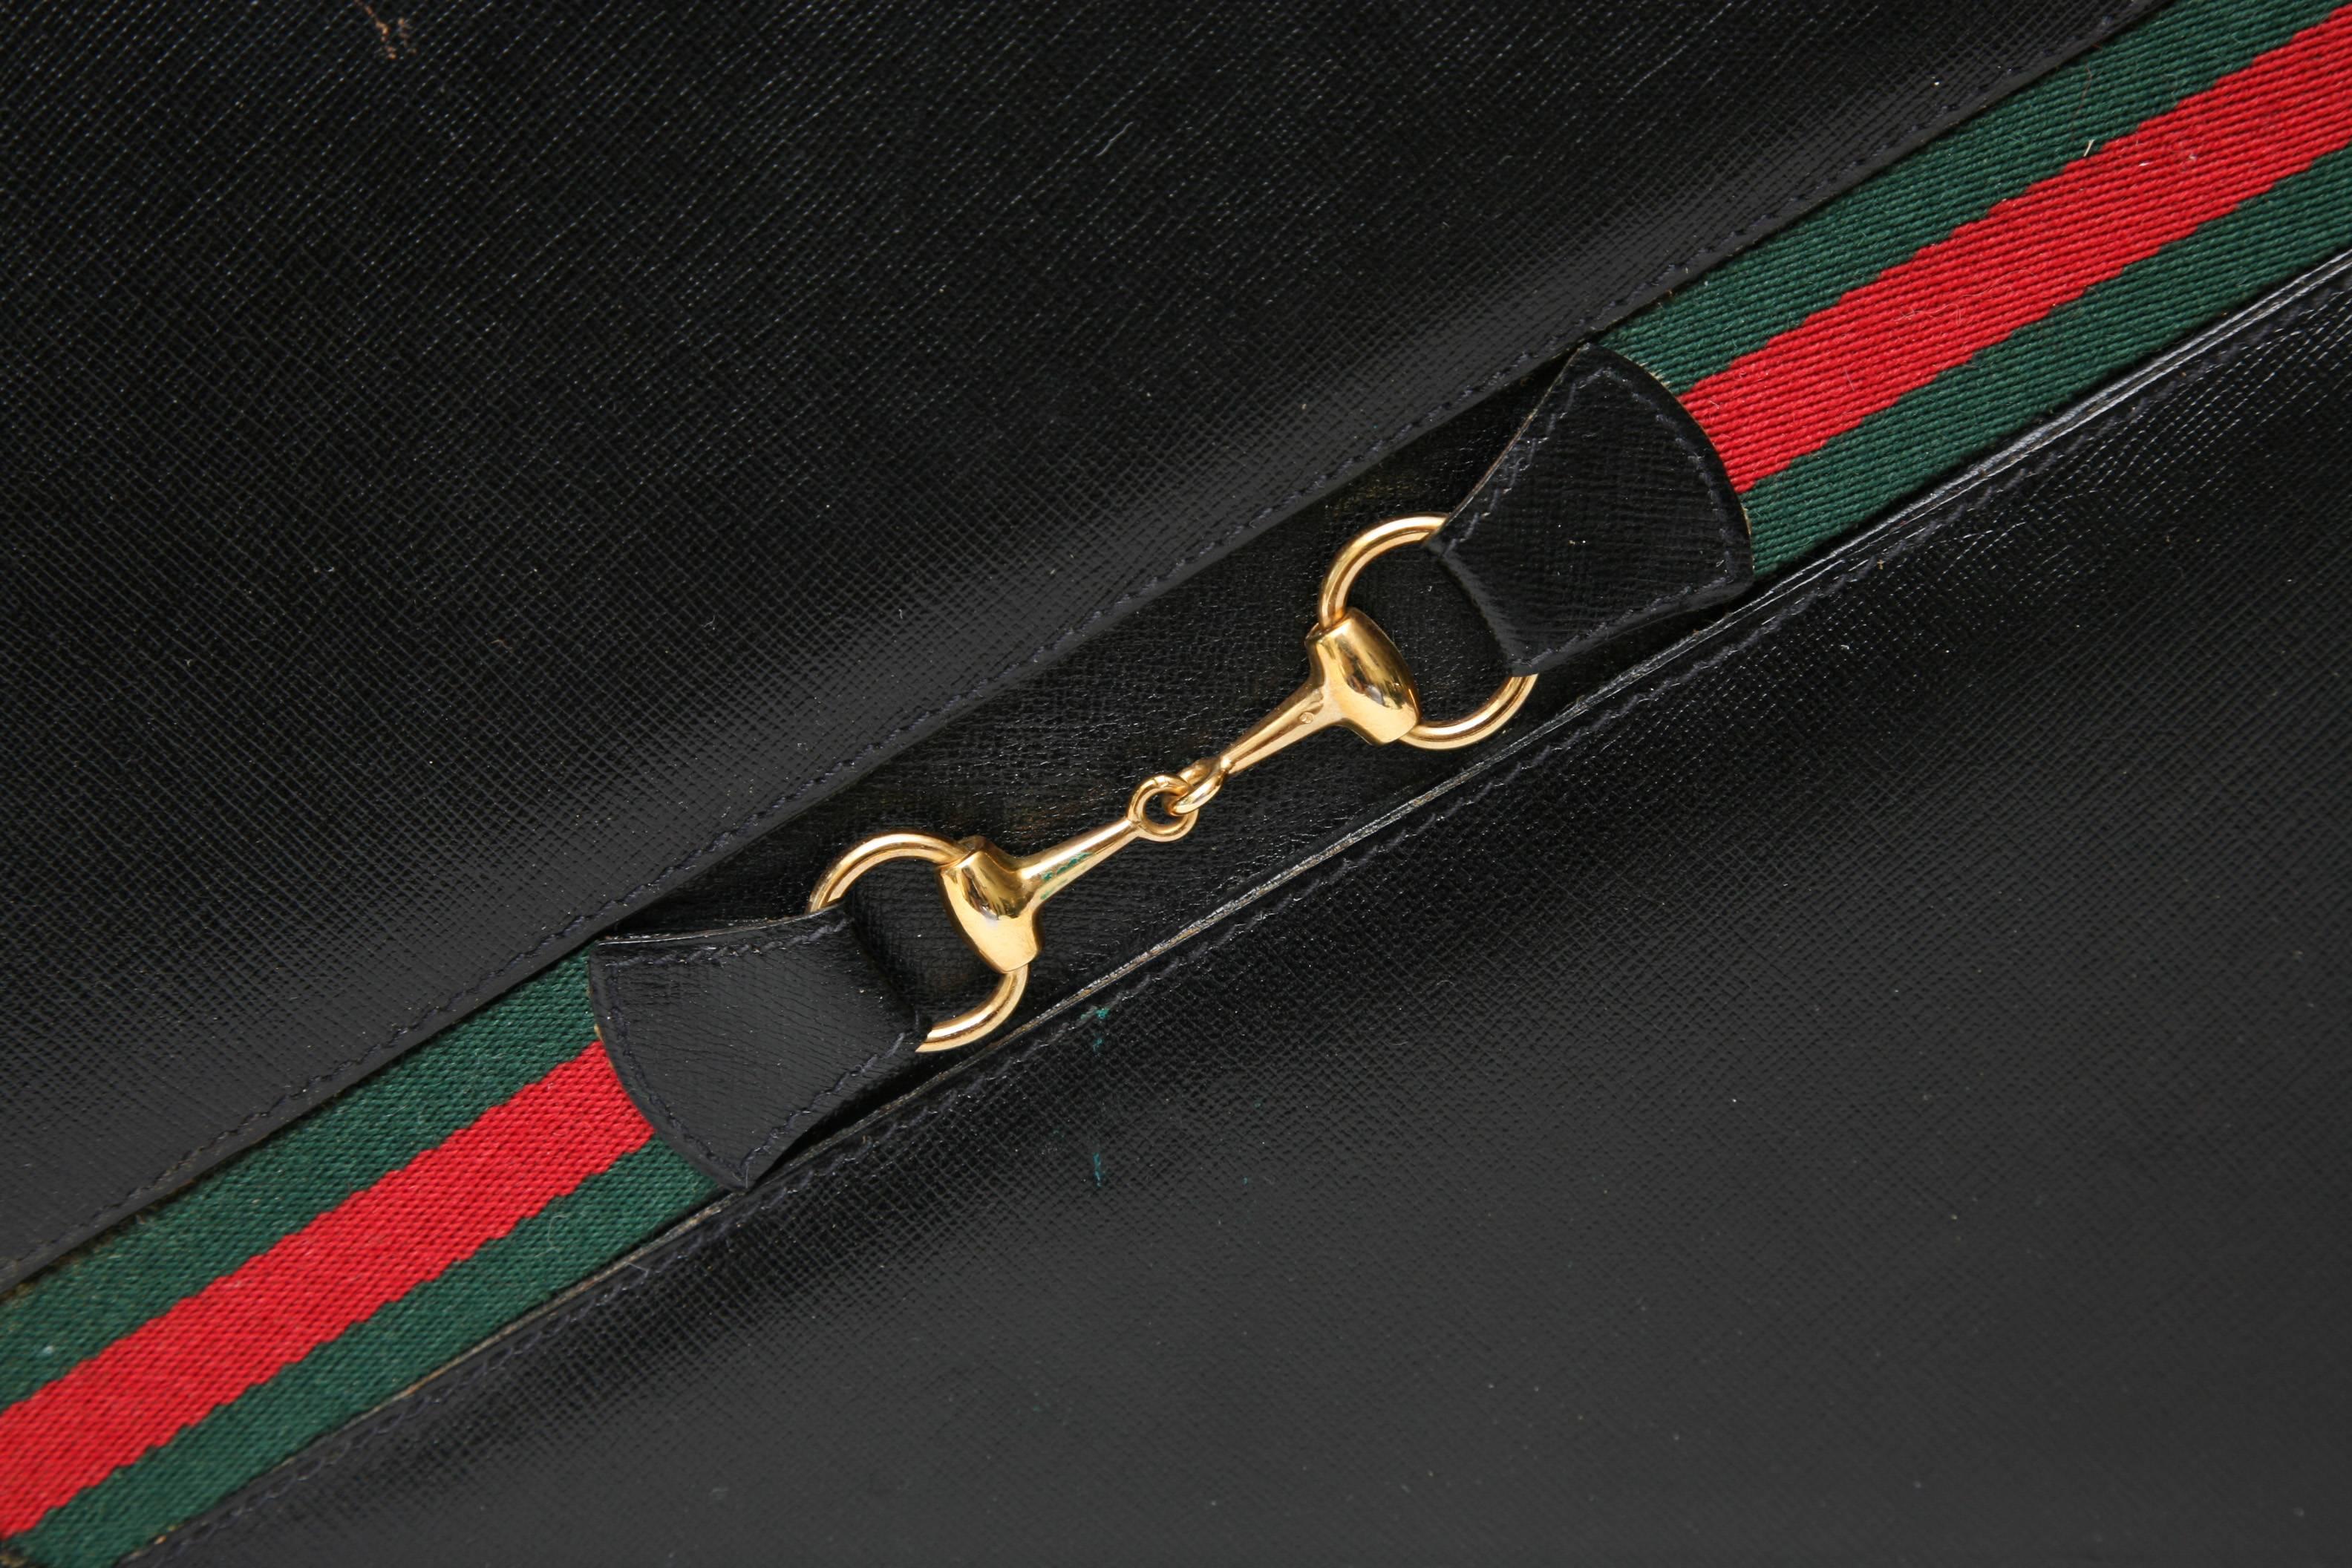 For the backgammon and Gucci lover, this wonderful vintage travel set can go anywhere. The case is black leather with the iconic Gucci colors and horse bit logo set into the front of the case. There is a key that locks the case shown on the front